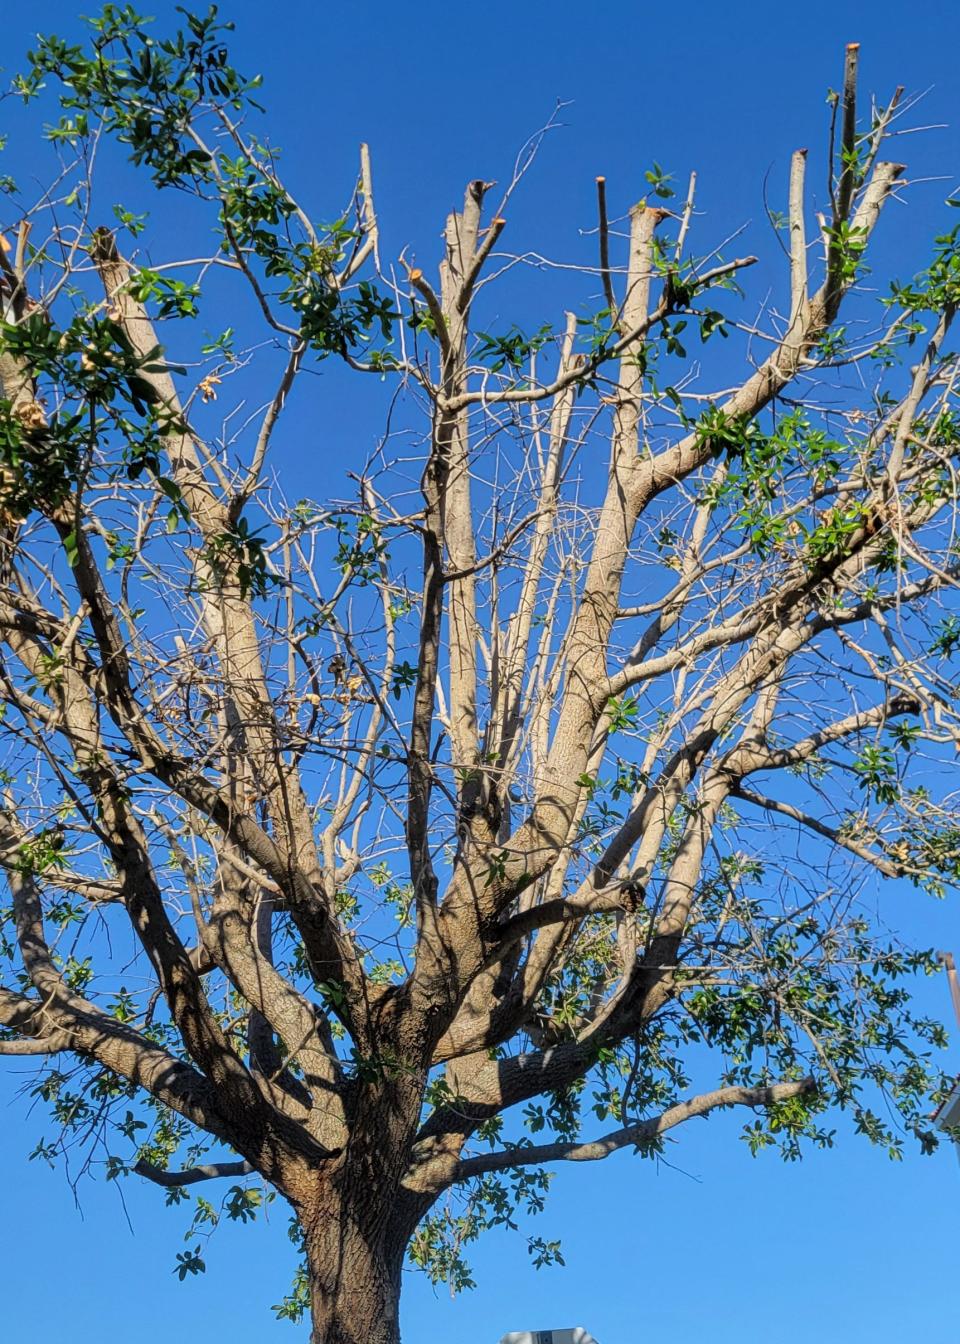 Improper pruning, such as that inflicted on this live oak, is harmful to trees and, in severe cases, can lead to the death of the tree.